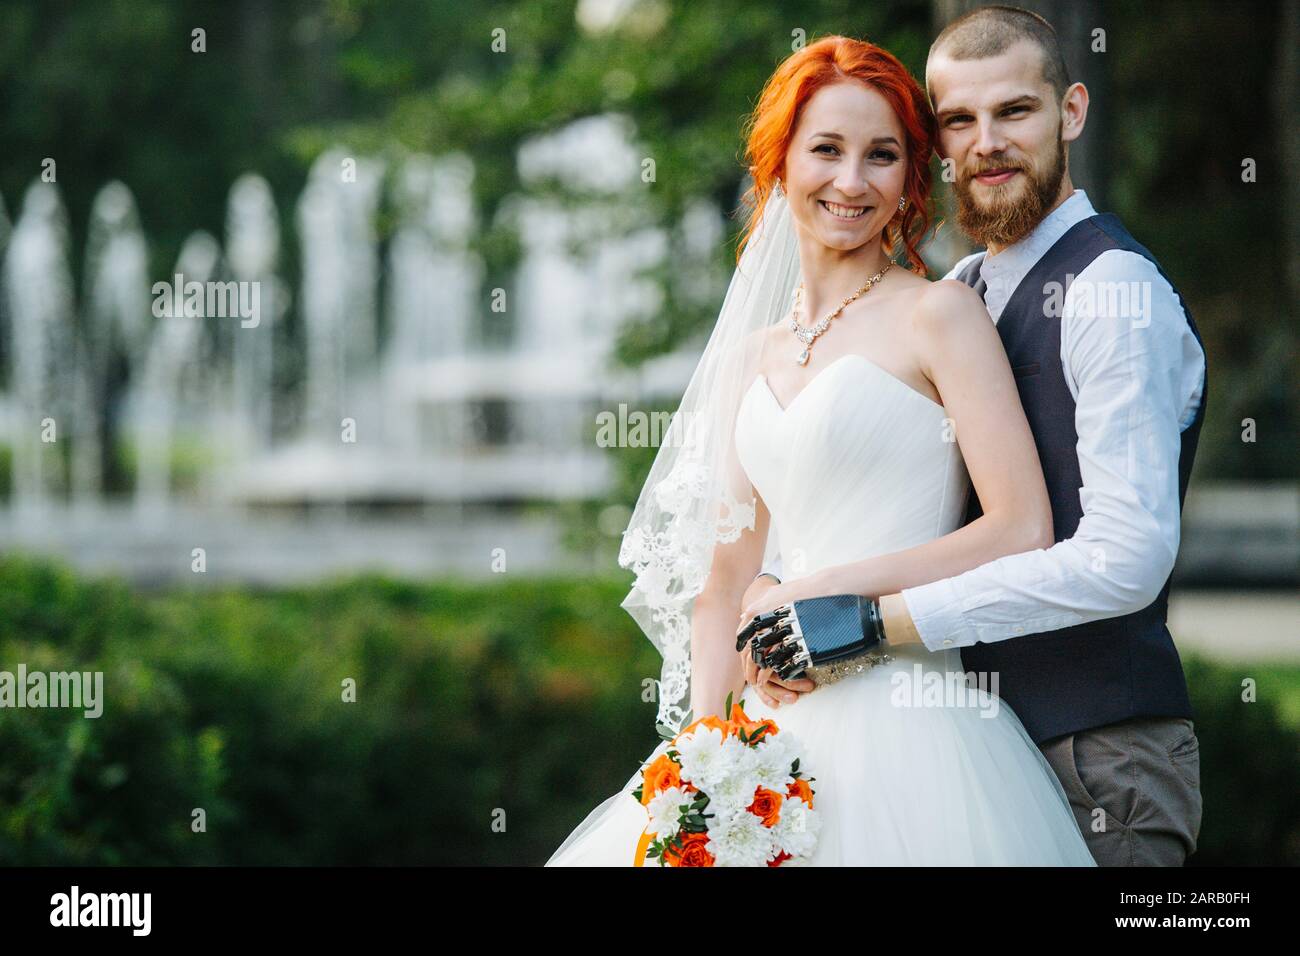 Portrait of the newly wed couple standing together in the park Stock Photo